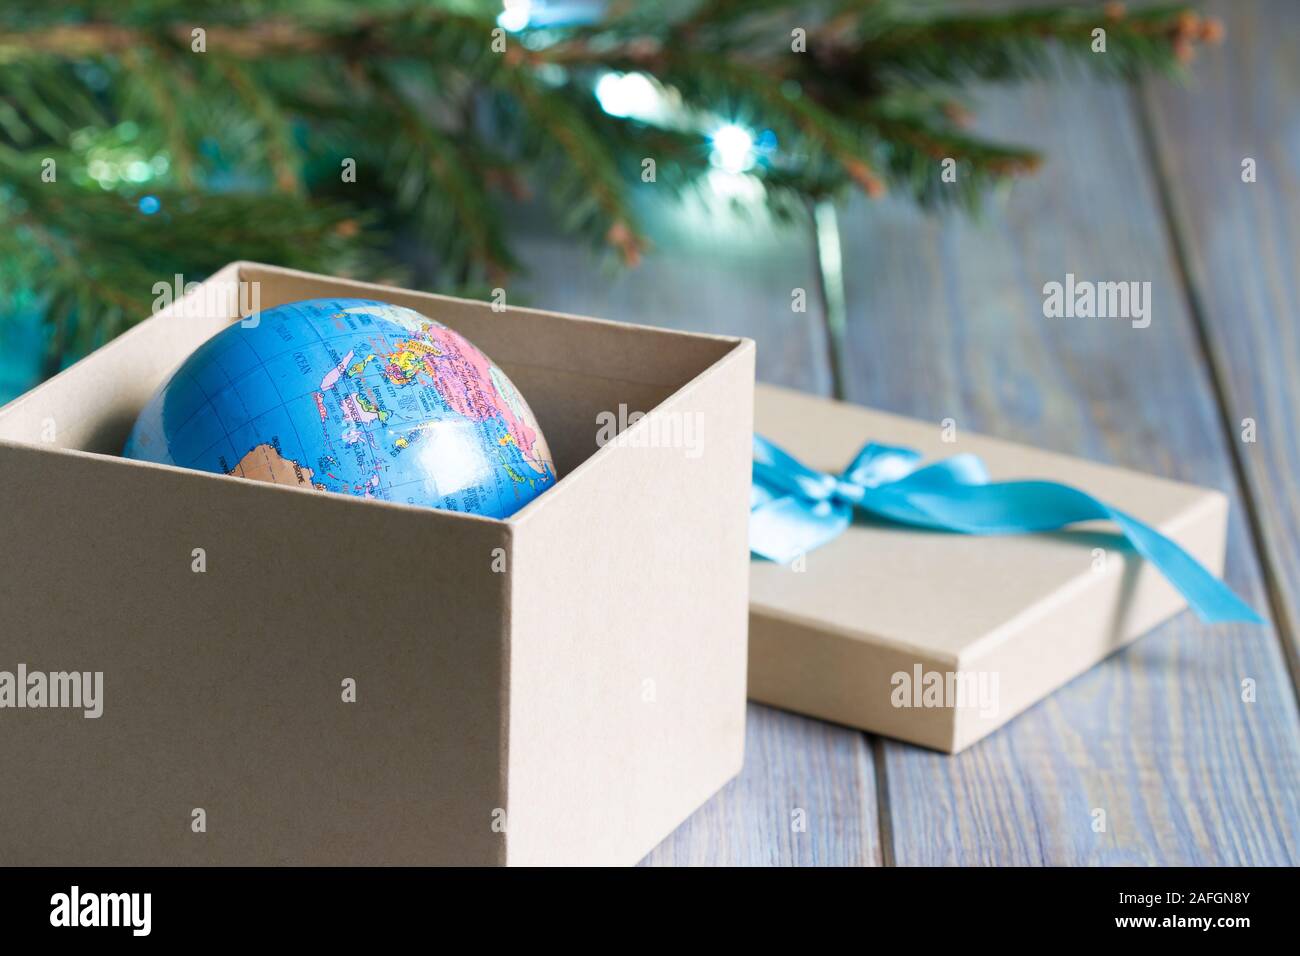 Globe in gift box. Travel gift for Christmas concept Stock Photo